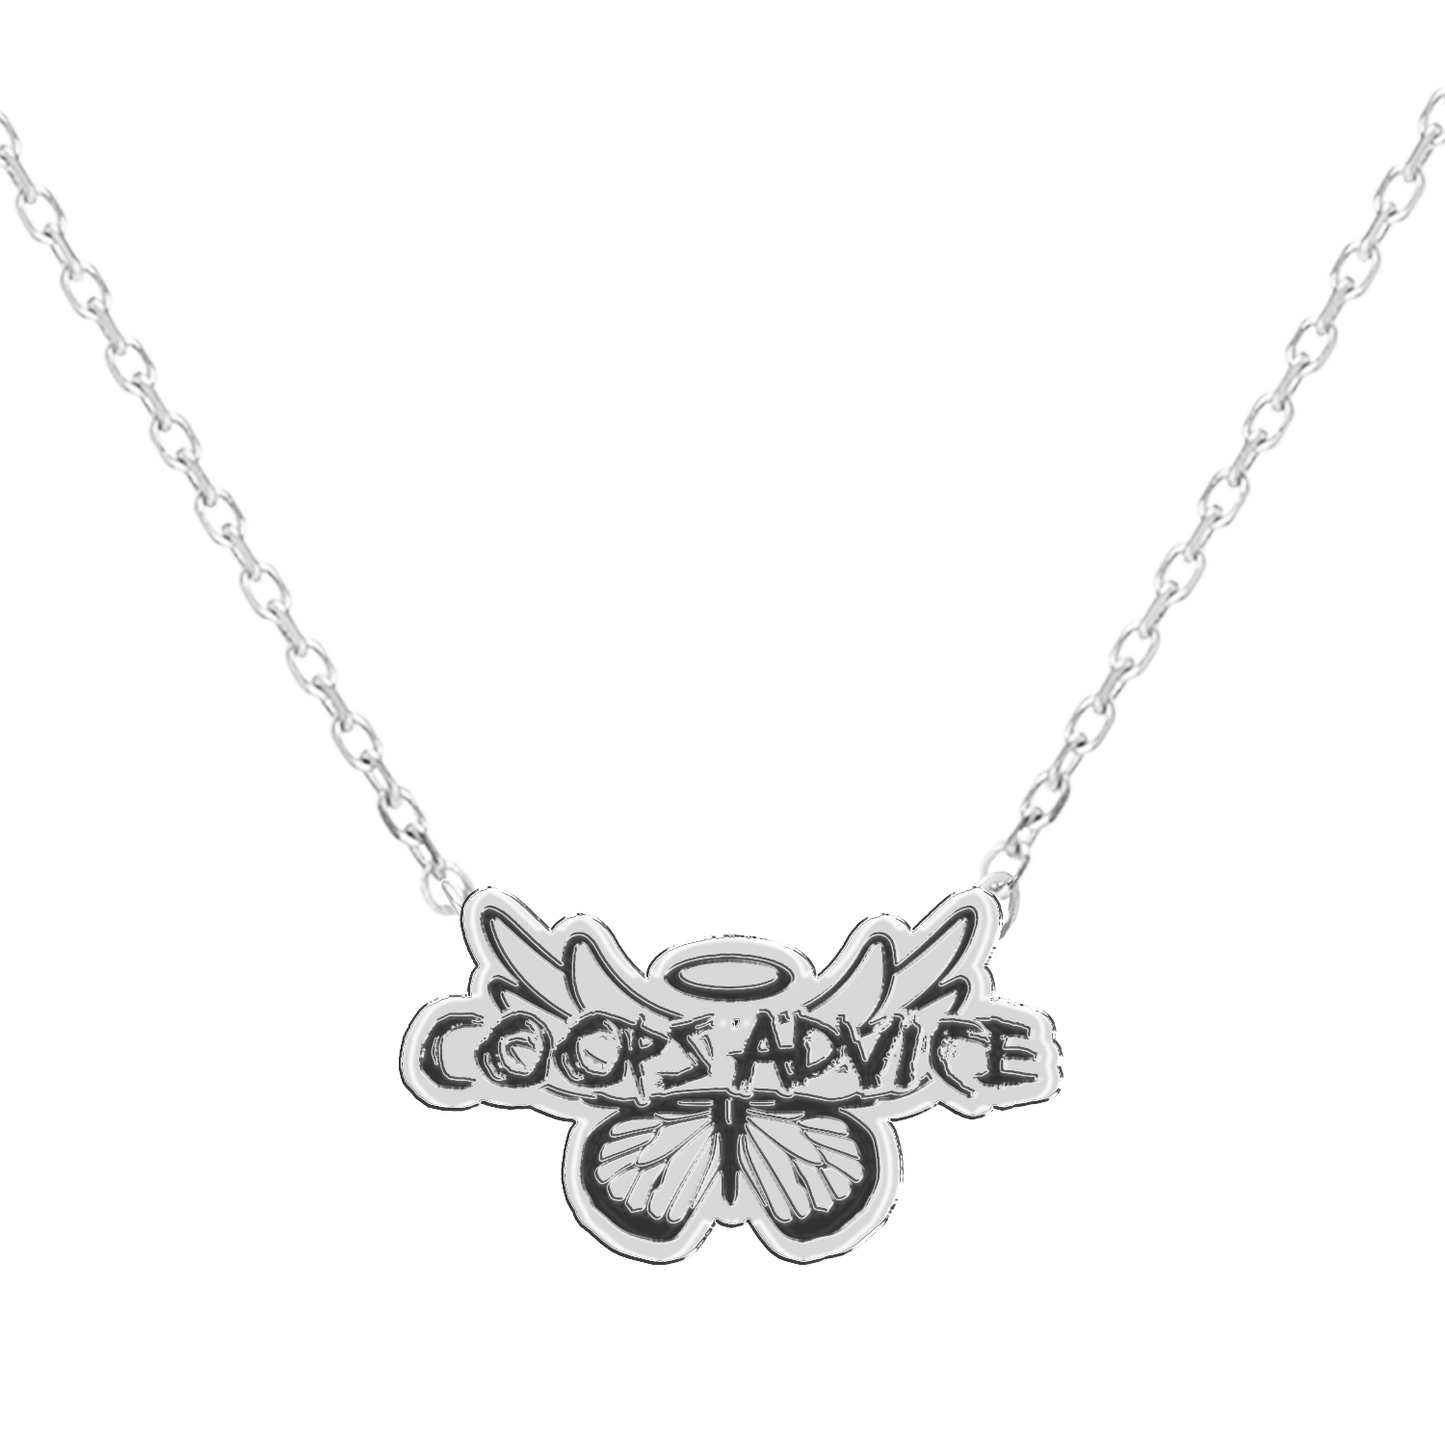 'Coop's Advice' Necklace